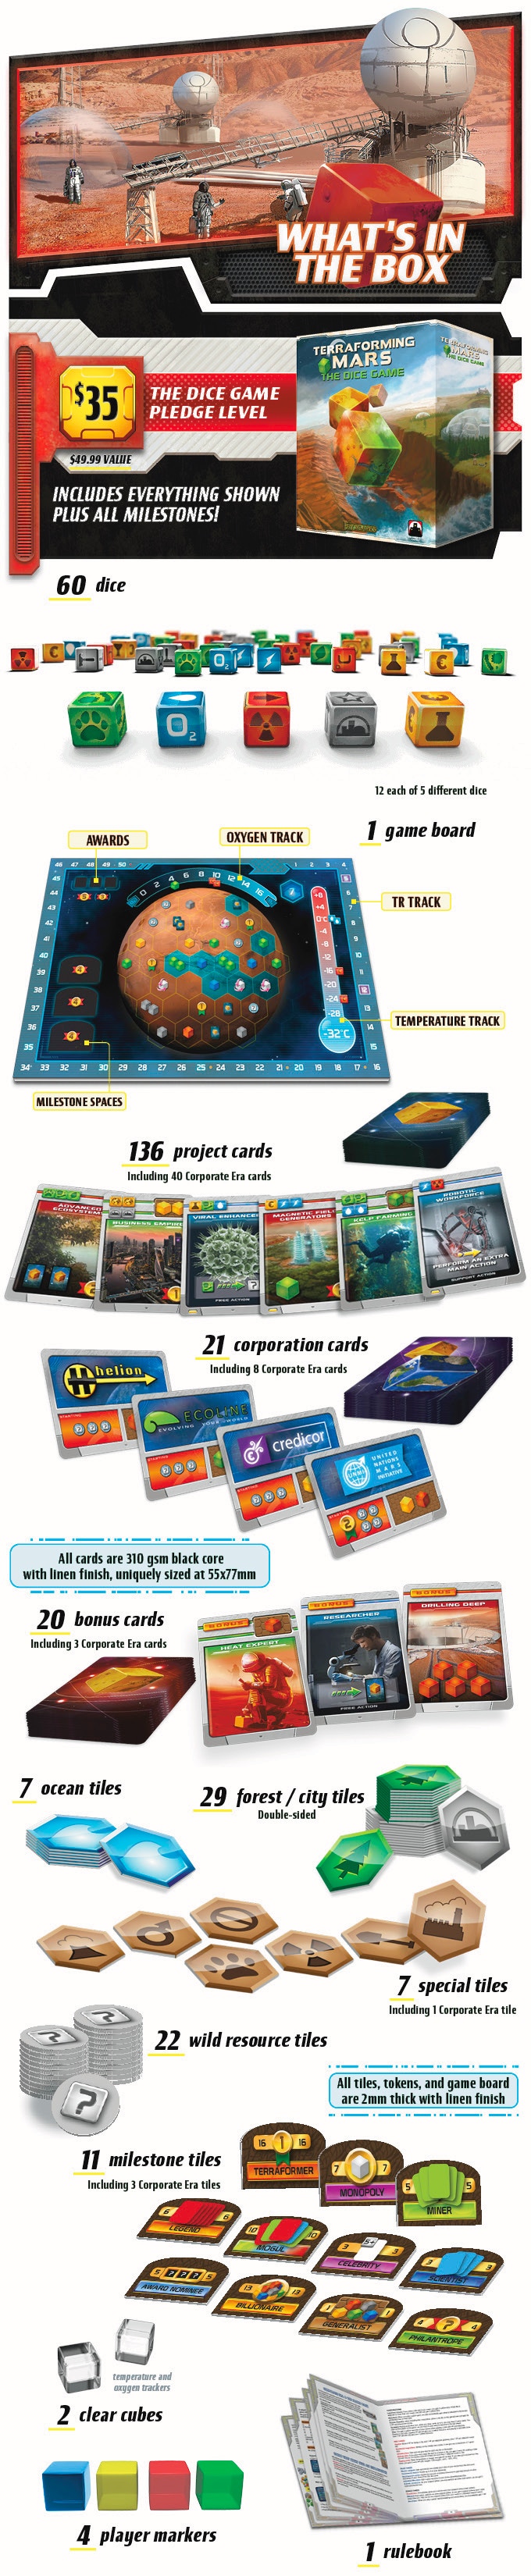 Terraforming Mars The Dice Game Contents - Stronghold Games